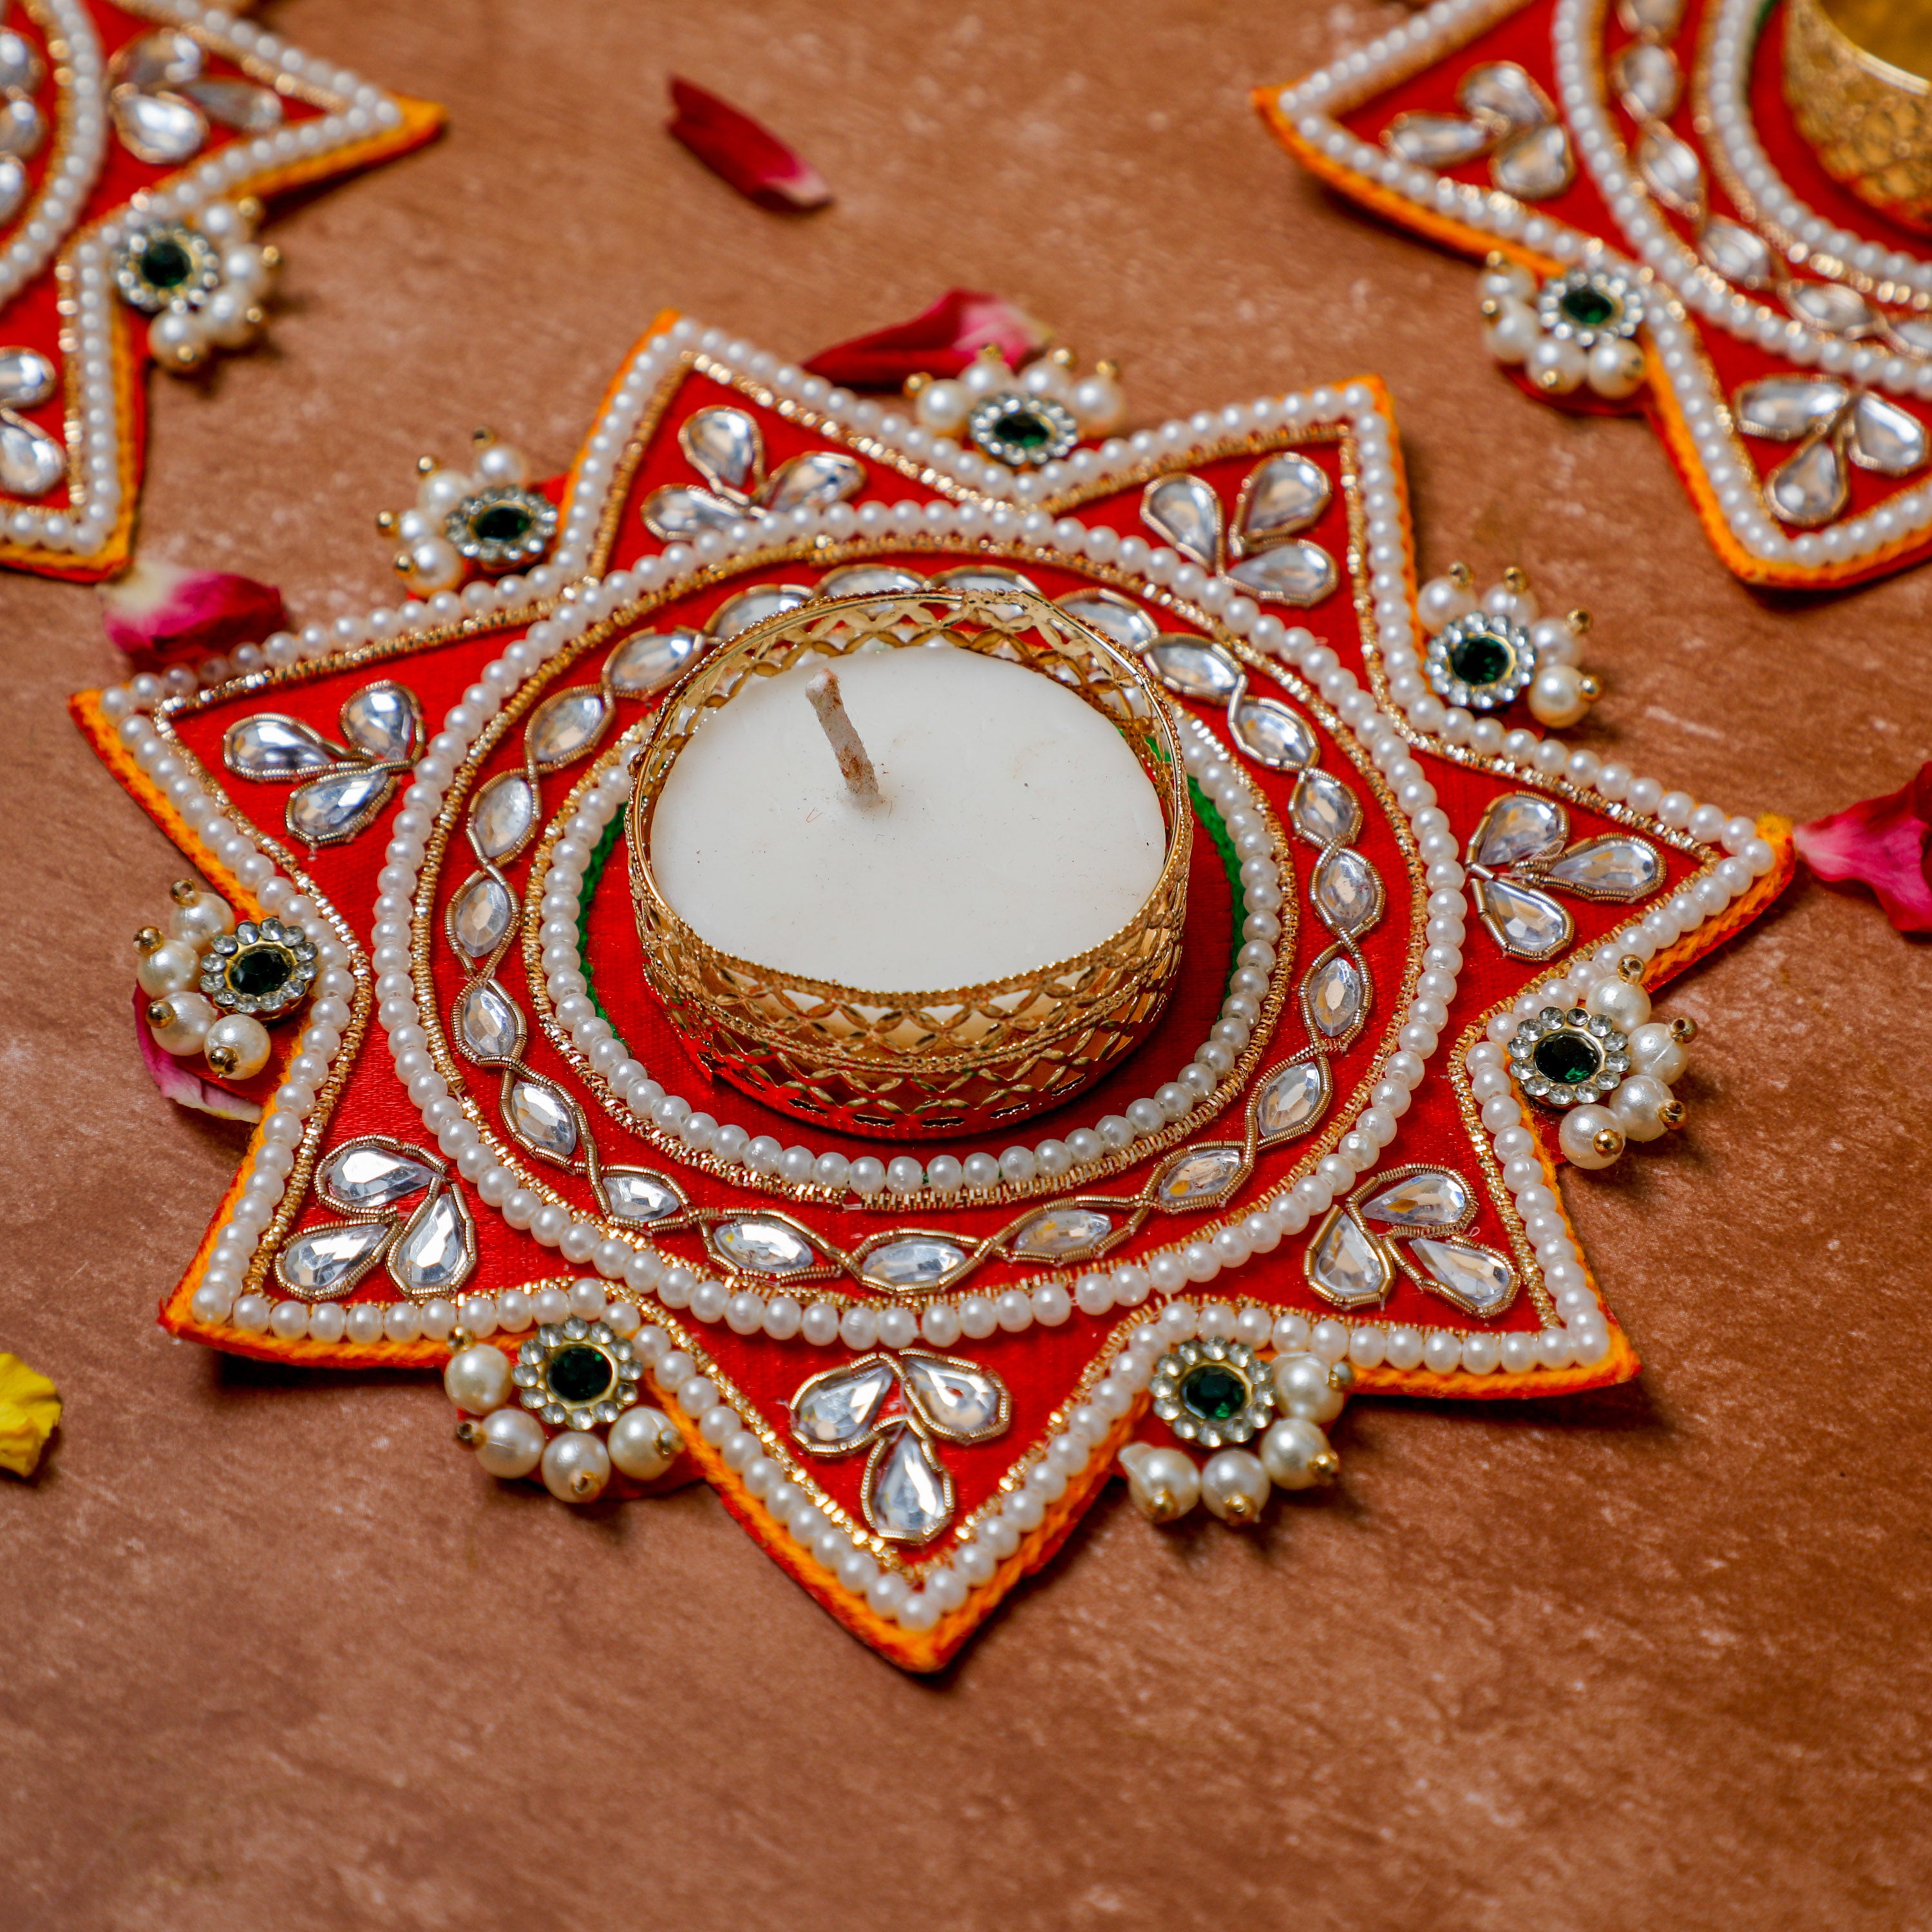 tea light candle holders are star shape, intricate gota patti designs, and artificial pearls and stones